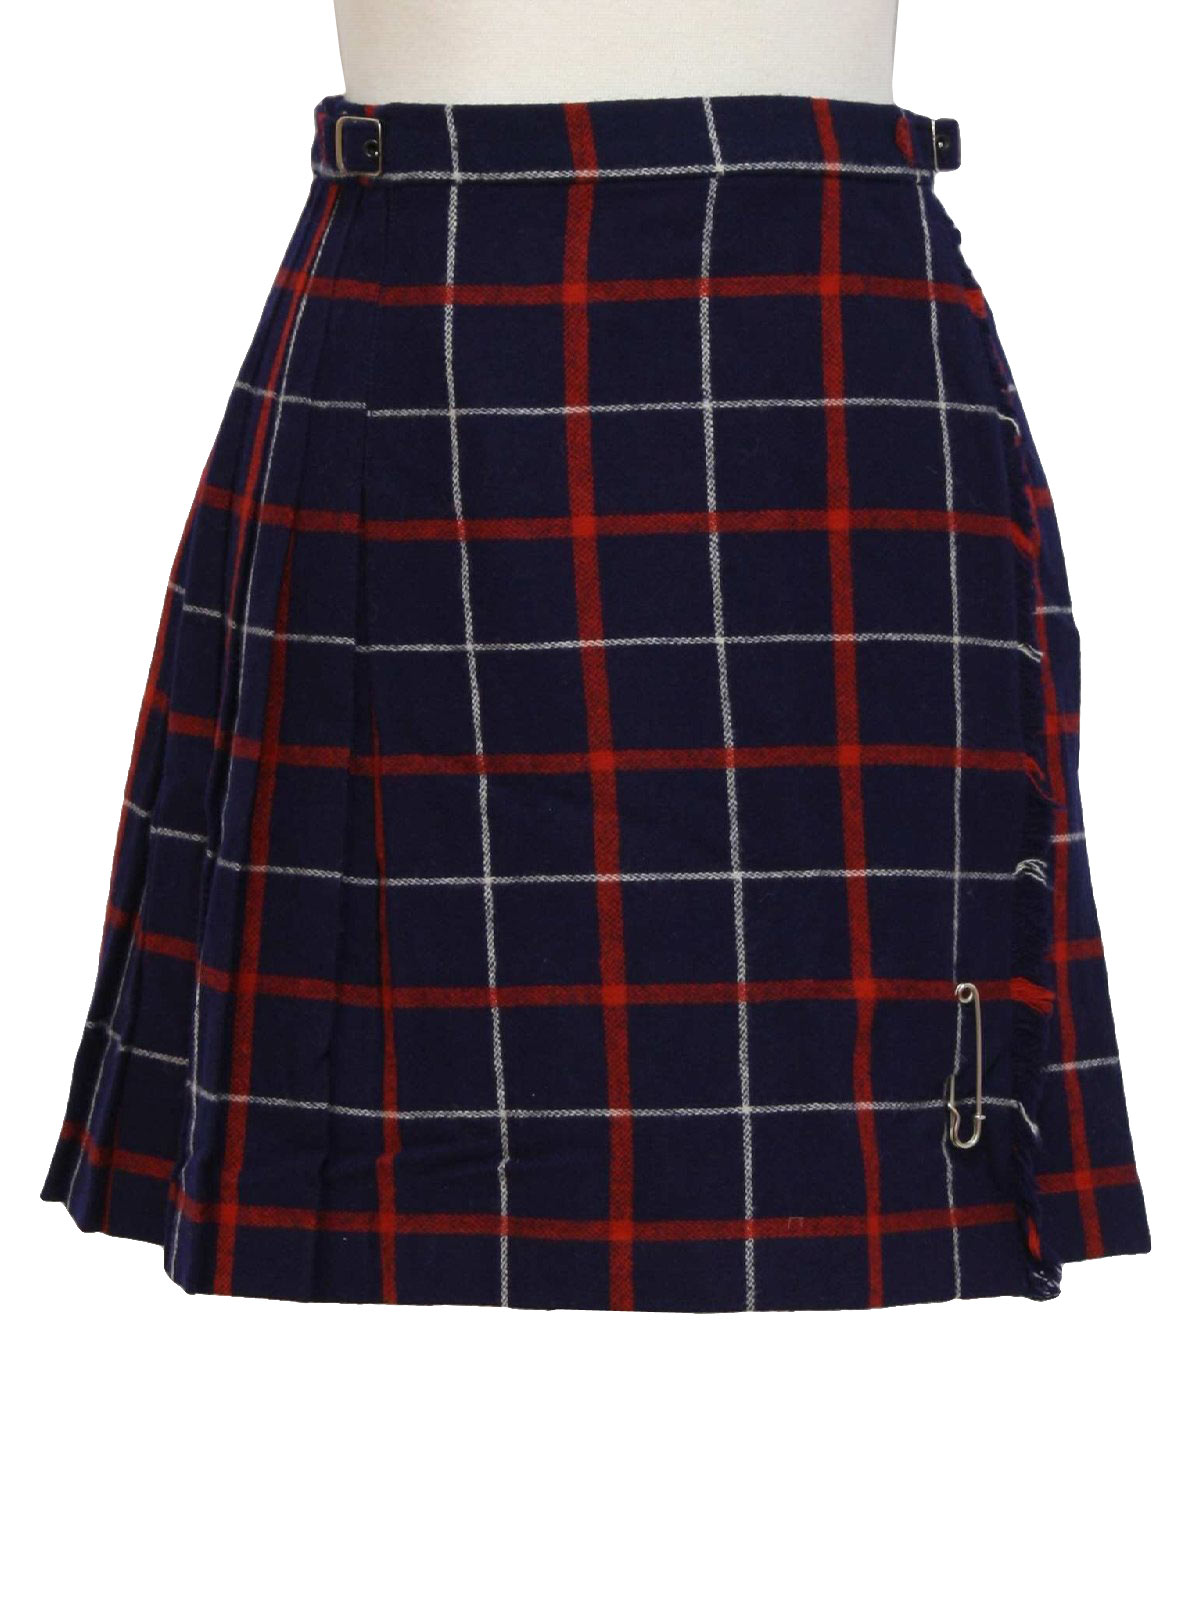 Retro 70s Wool Skirt (Made in Scotland) : 70s -Made in Scotland- Womens ...